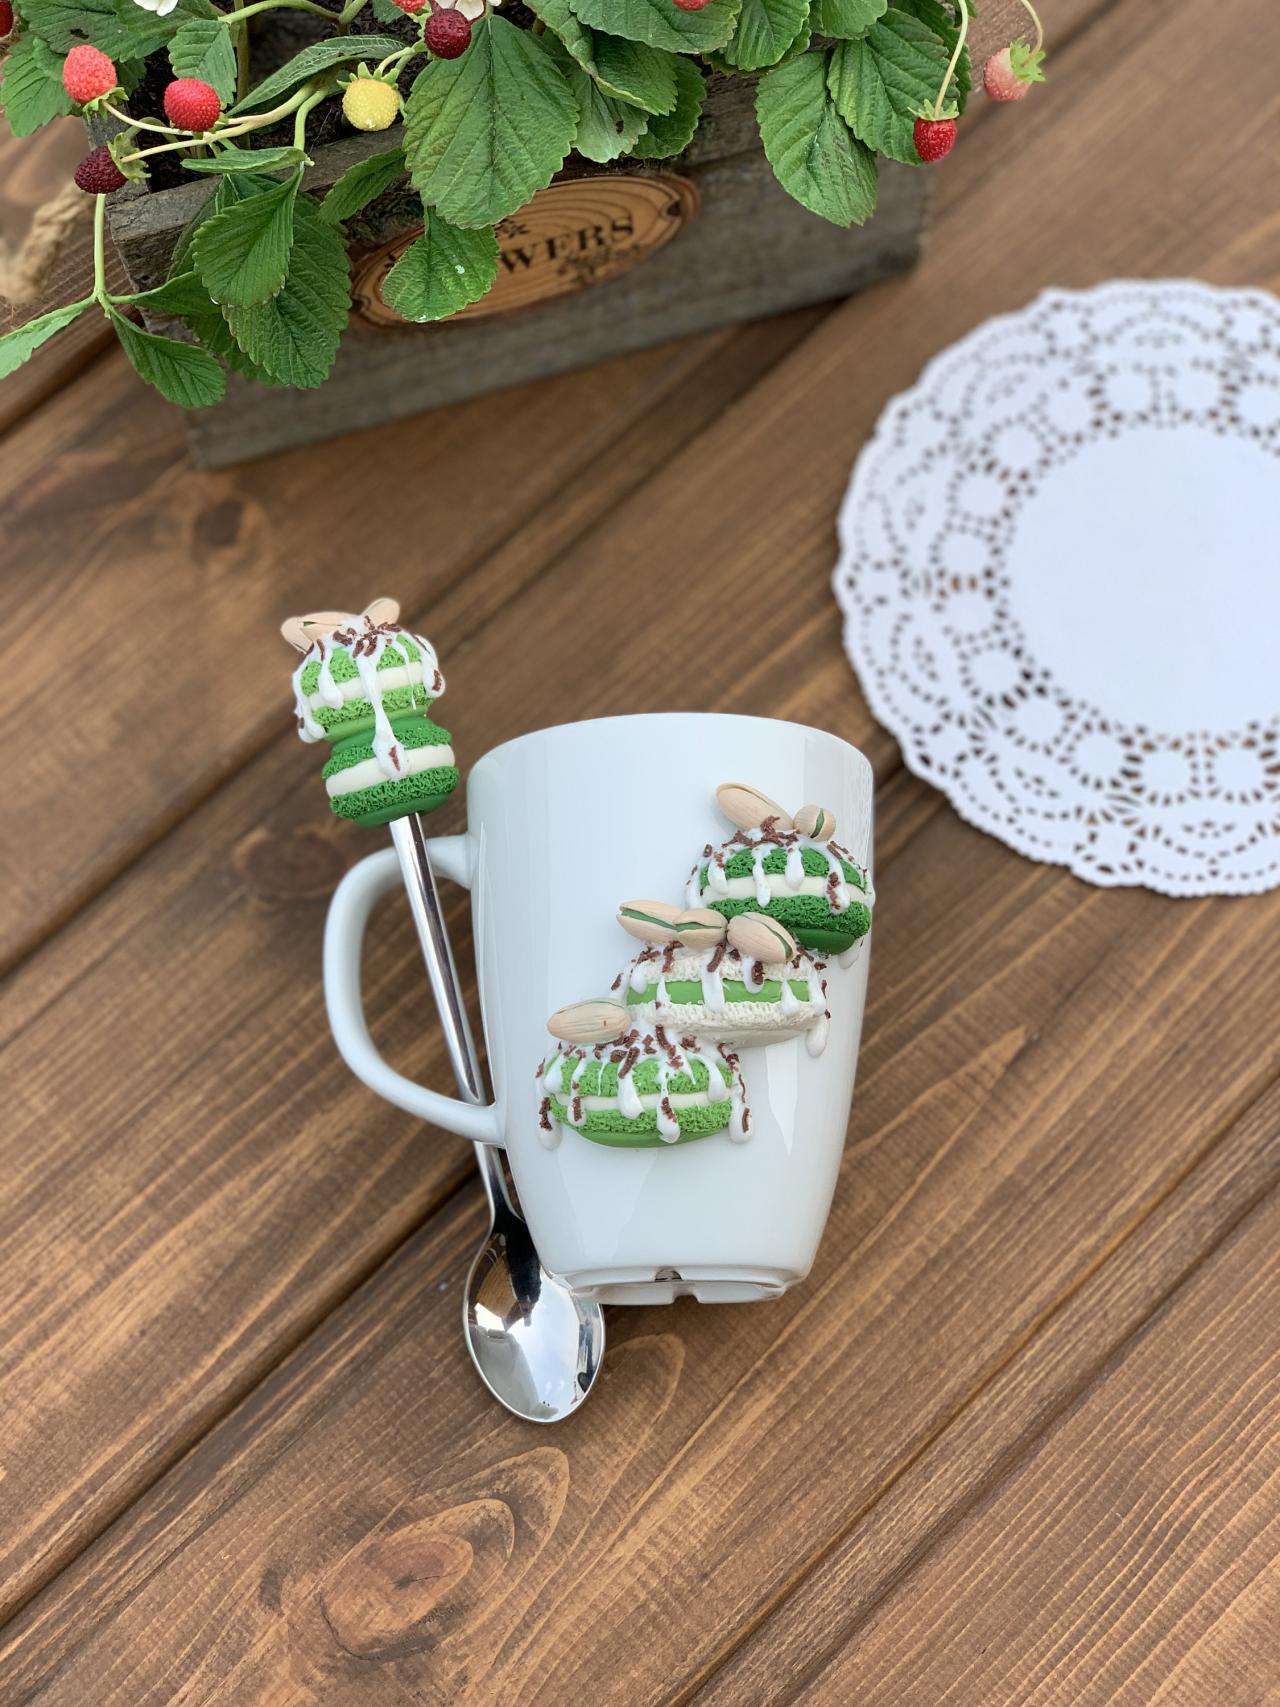 White cup for tea, Sweet mug and decor spoon, macaroons on the mug, delicious spoon with berries, green decor, sweet cookies.